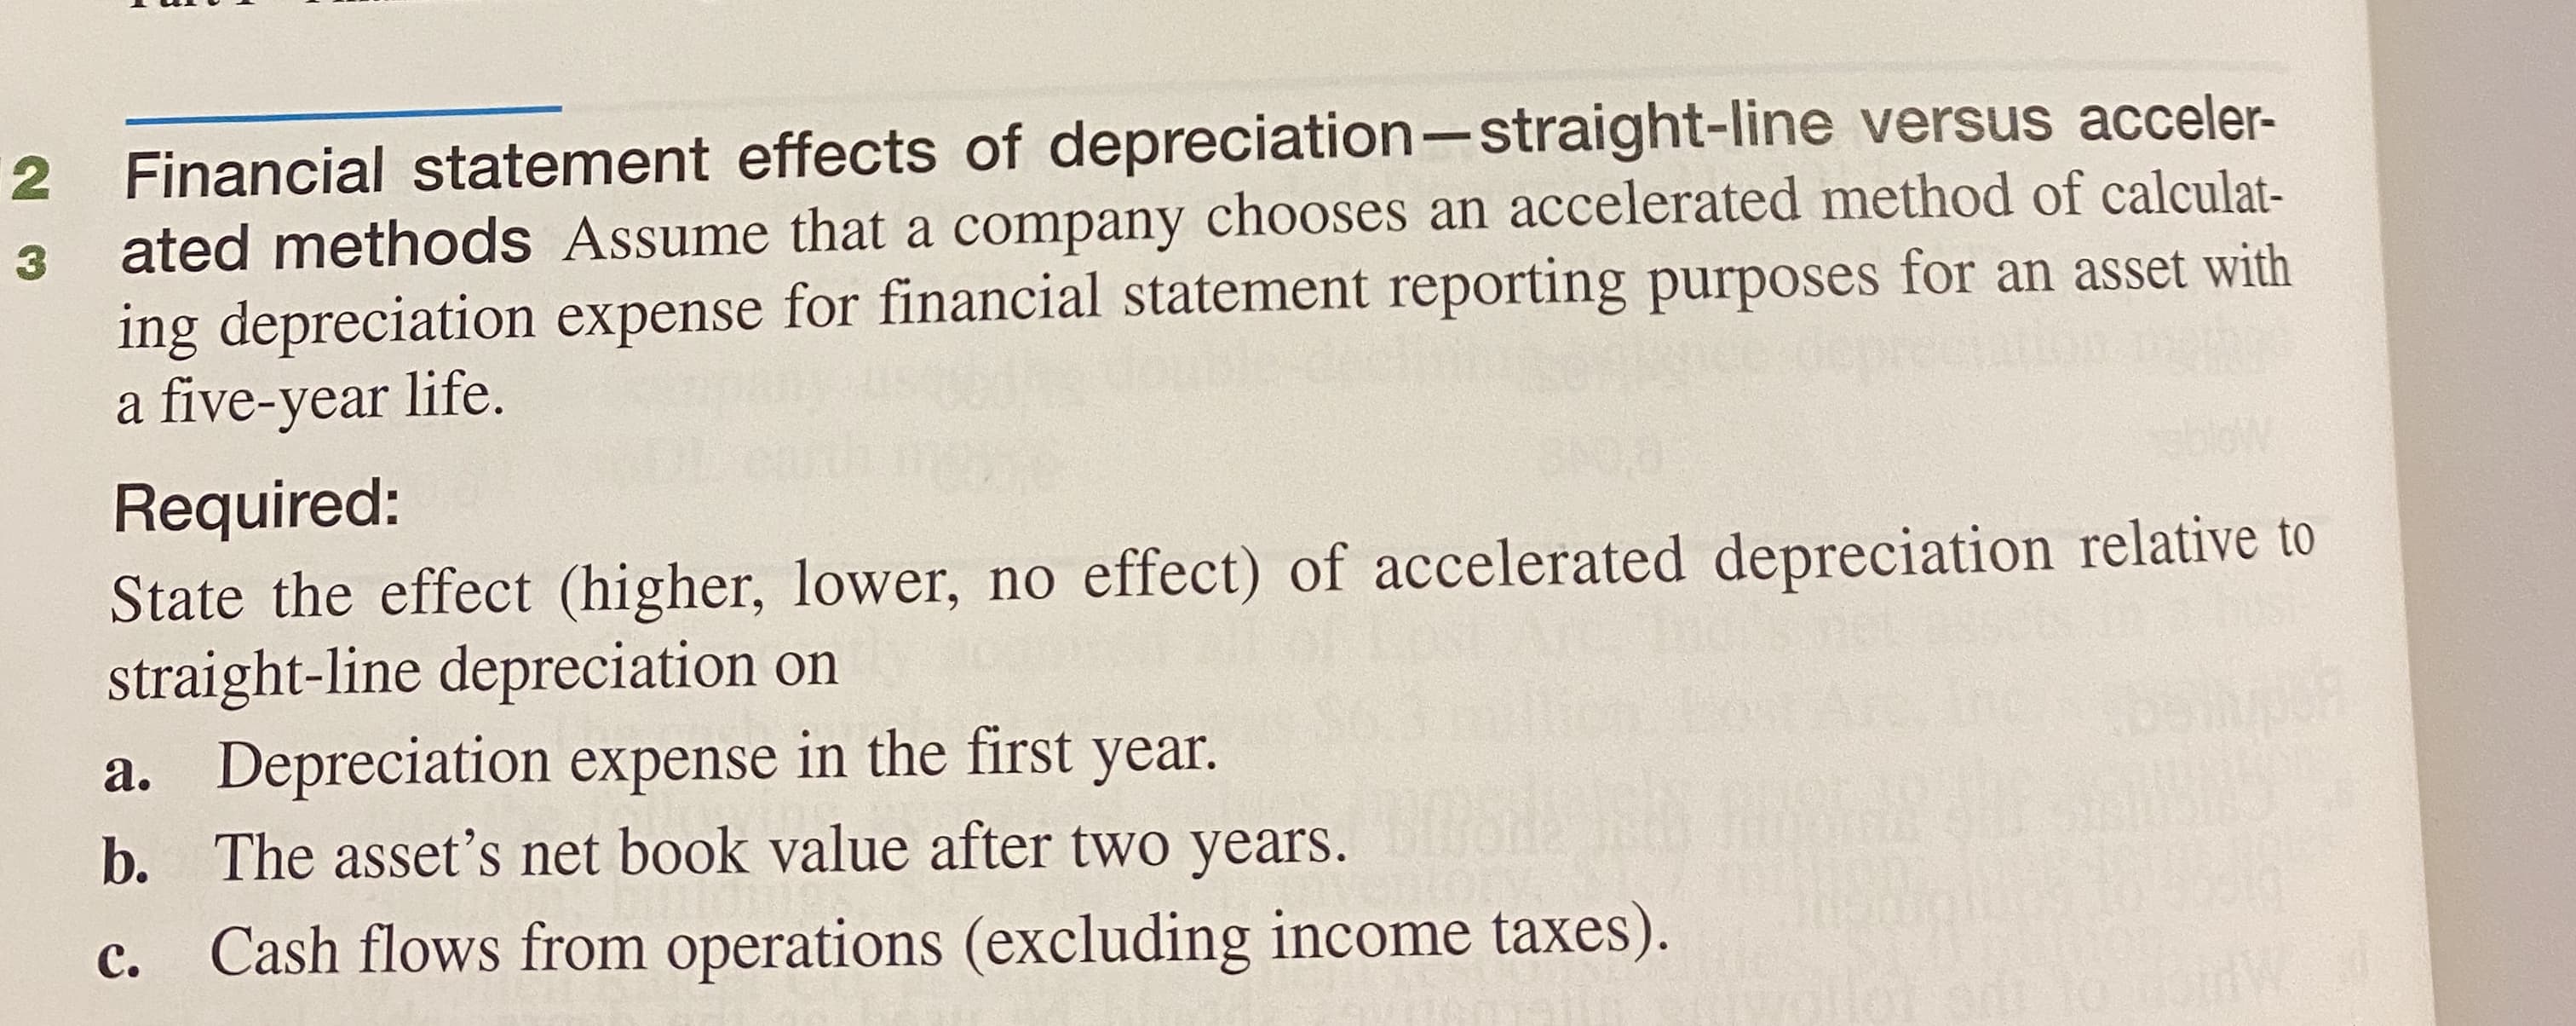 Required:
State the effect (higher, lower, no effect) of accelerated depreciation relative to
straight-line depreciation on
a. Depreciation expense in the first year.
b. The asset's net book value after two years.
Cash flows from operations (excluding income taxes).
с.
